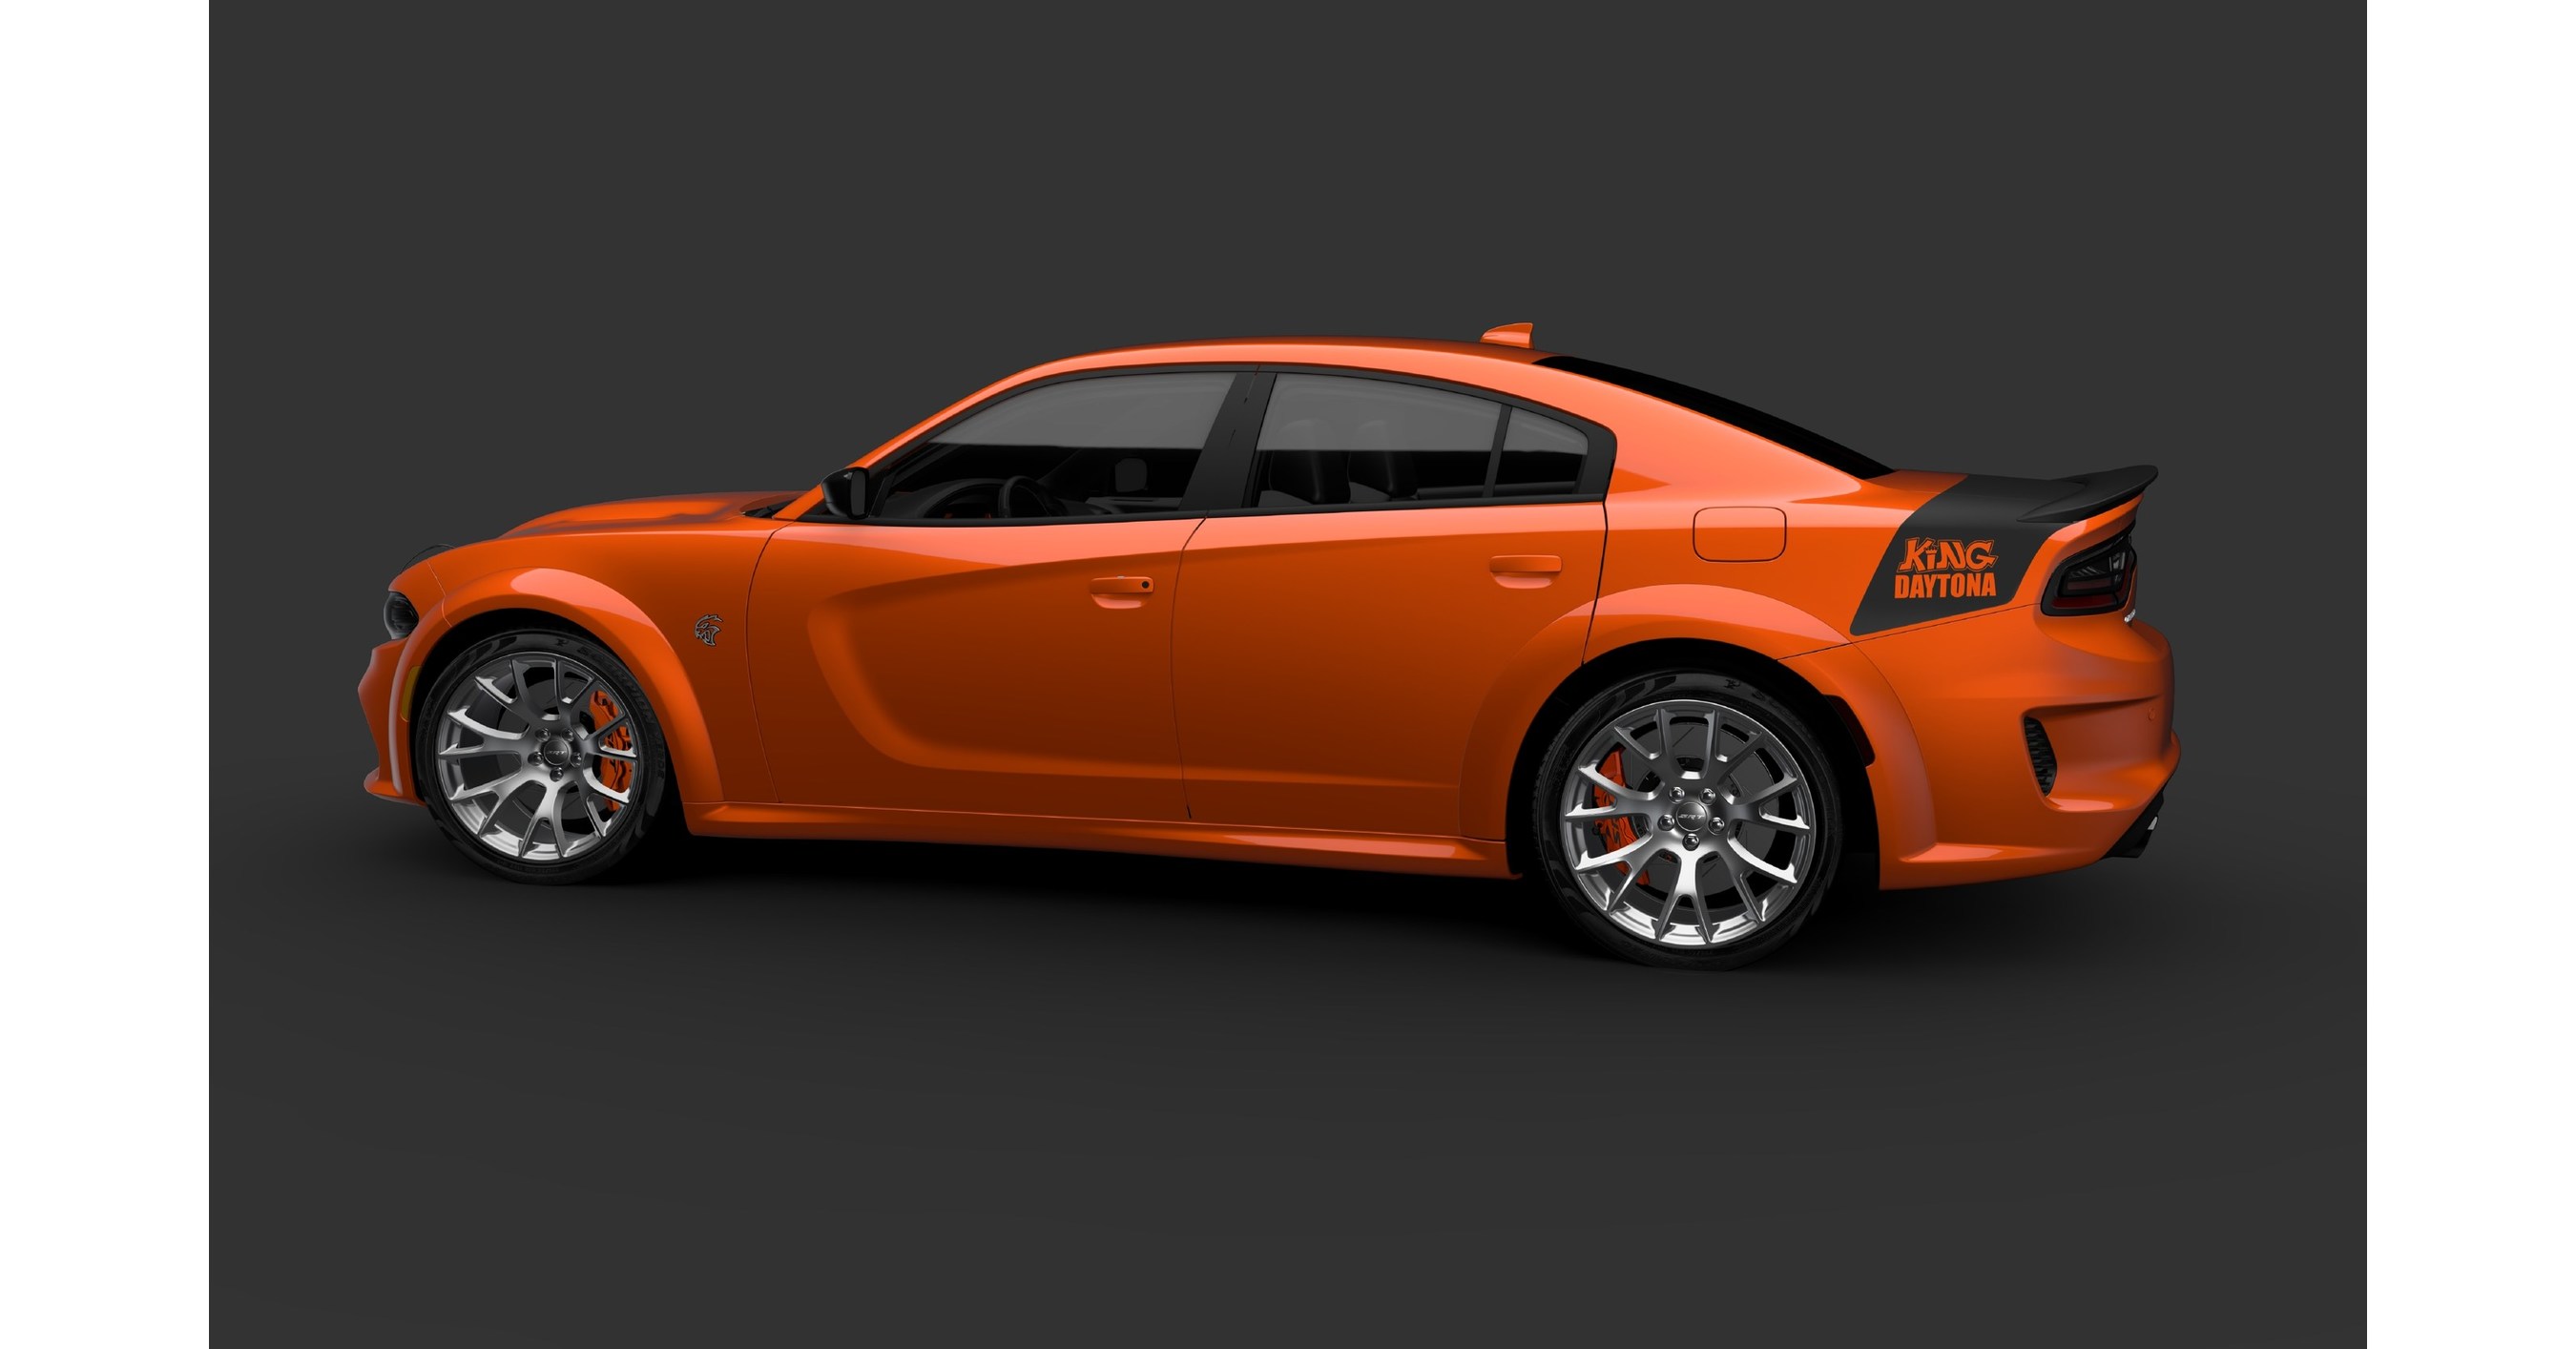 Dodge Crowns Latest 'Last Call' Special-edition Model: 2023 Dodge Charger  King Daytona